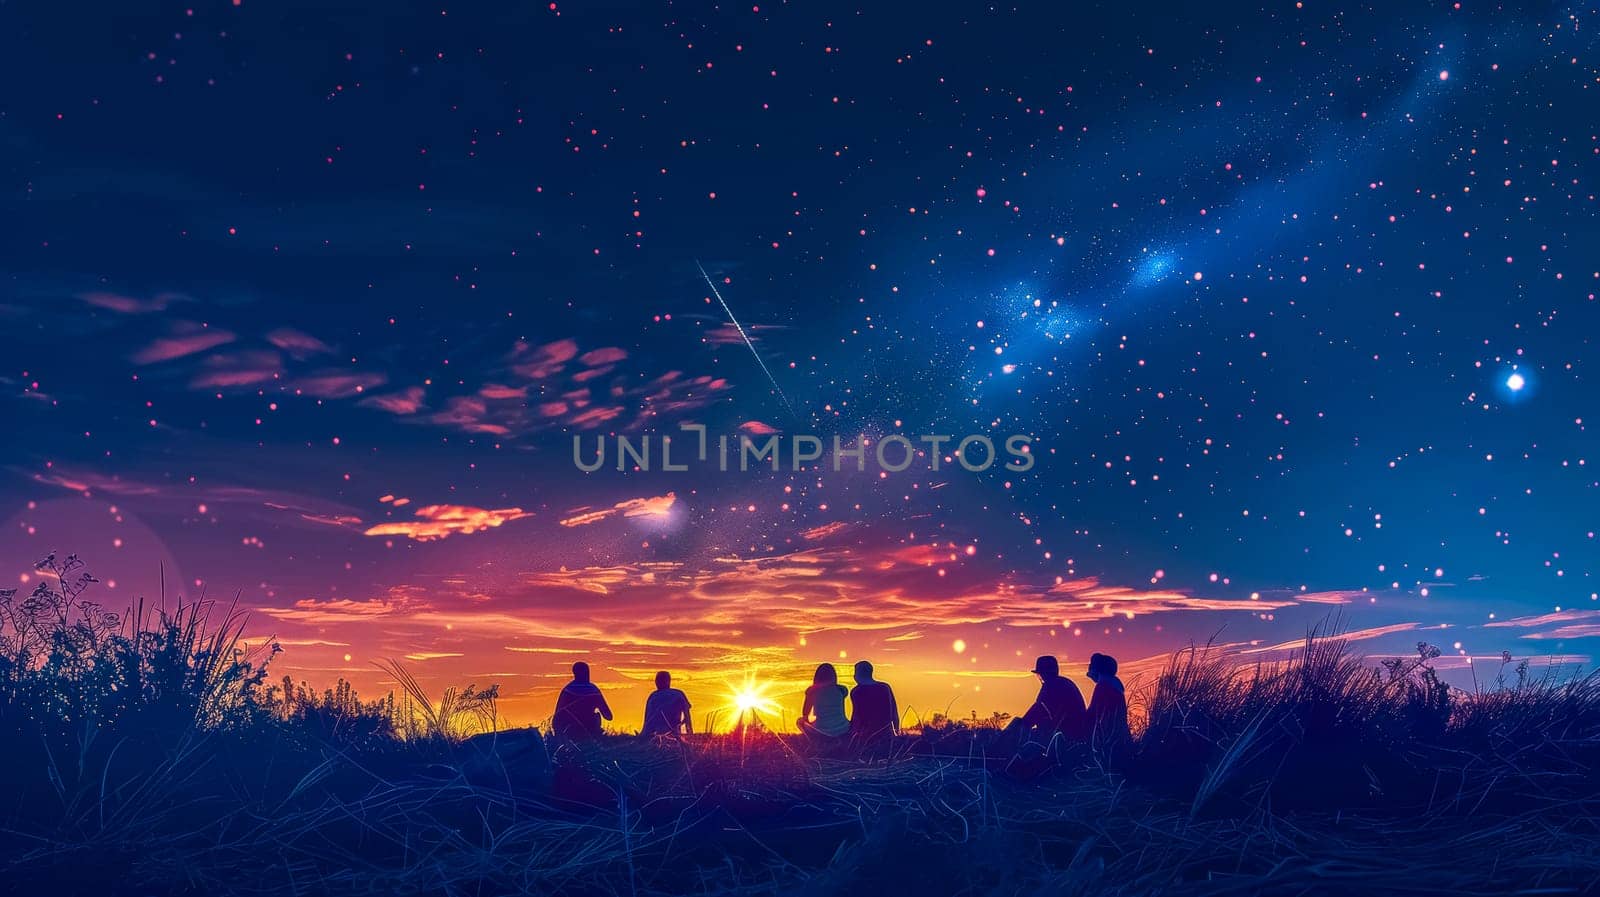 Silhouettes of people against a vivid twilight sky sprinkled with stars and meteors